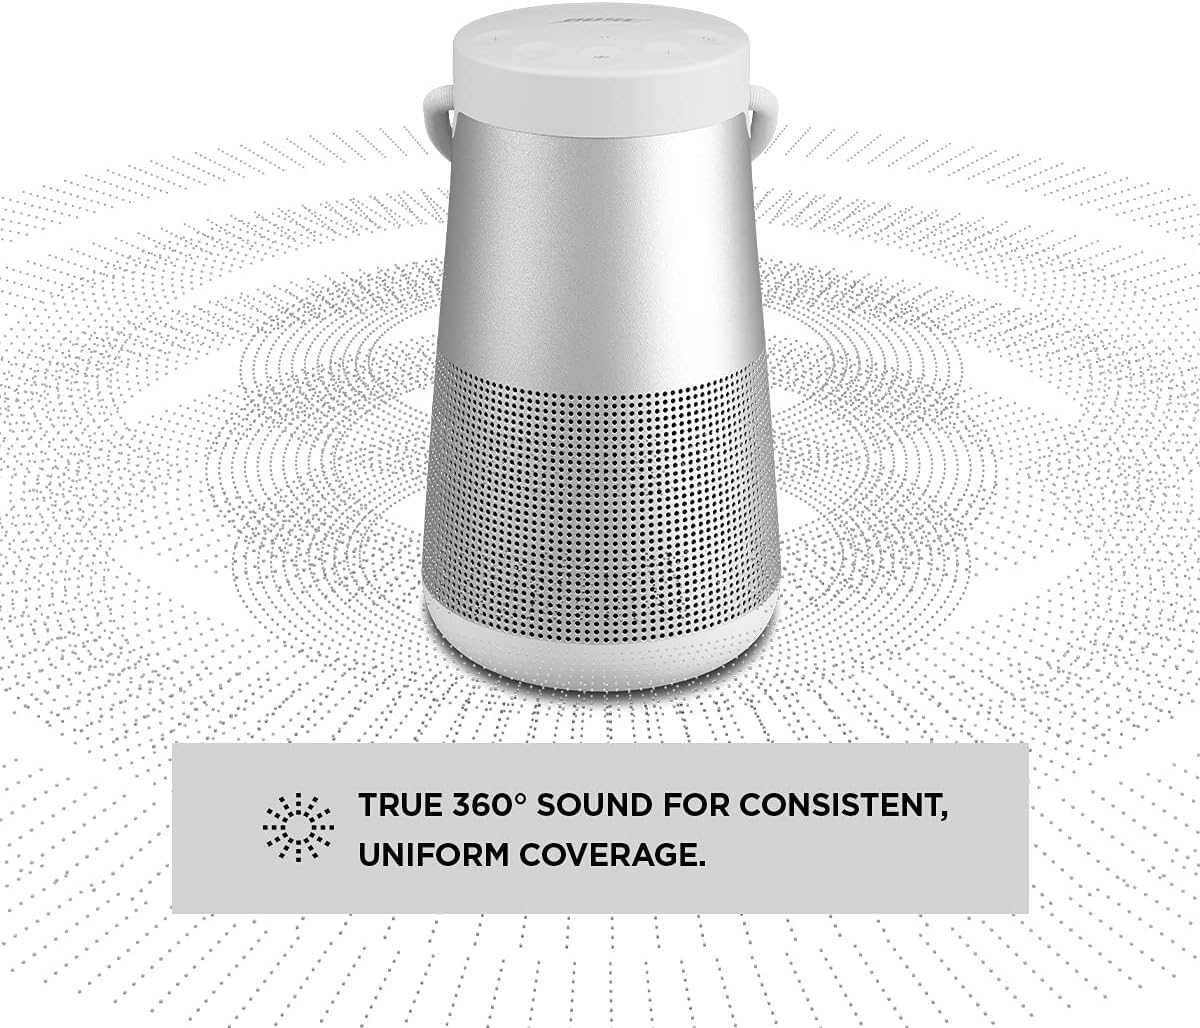 Luxe Silver Bose Soundlink Revolve Plus II: Enhanced battery life, durable and portable design, built-in microphone for calls and voice assistant access. 0017817825375